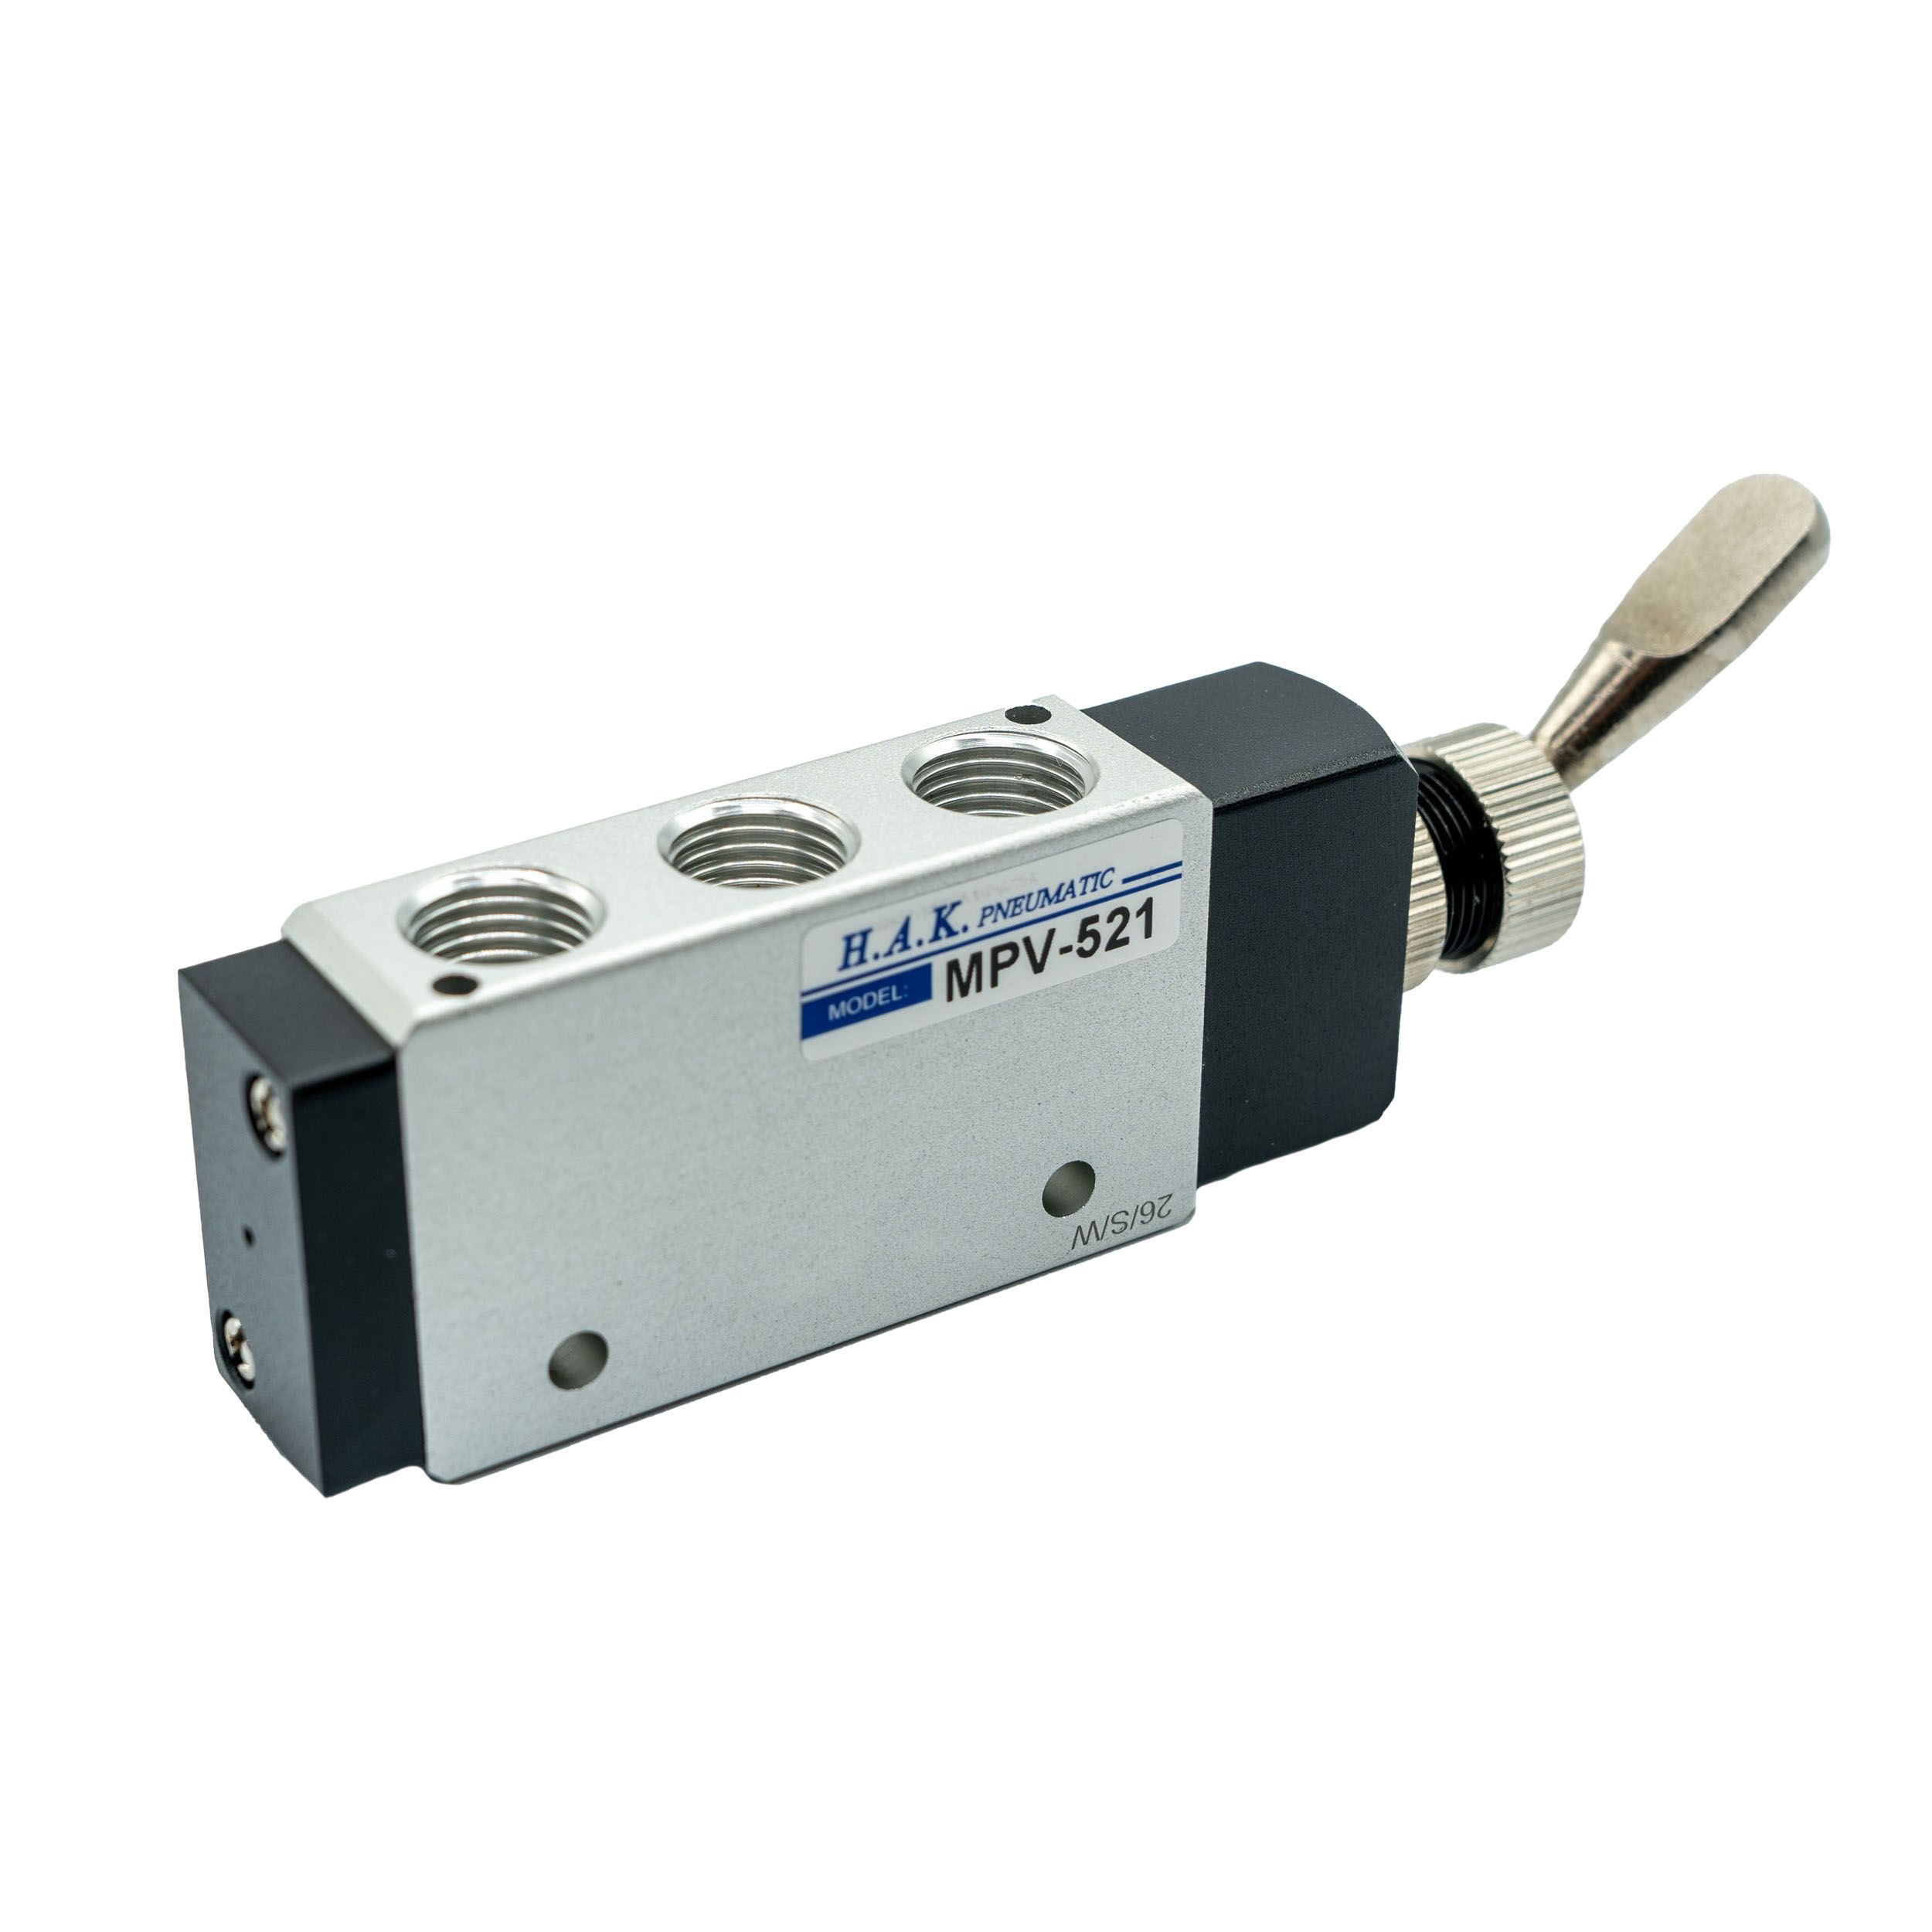 Mechanical pneumatic Valve with Detented Toggle Switch NPT 1/8”. (MPV 522)